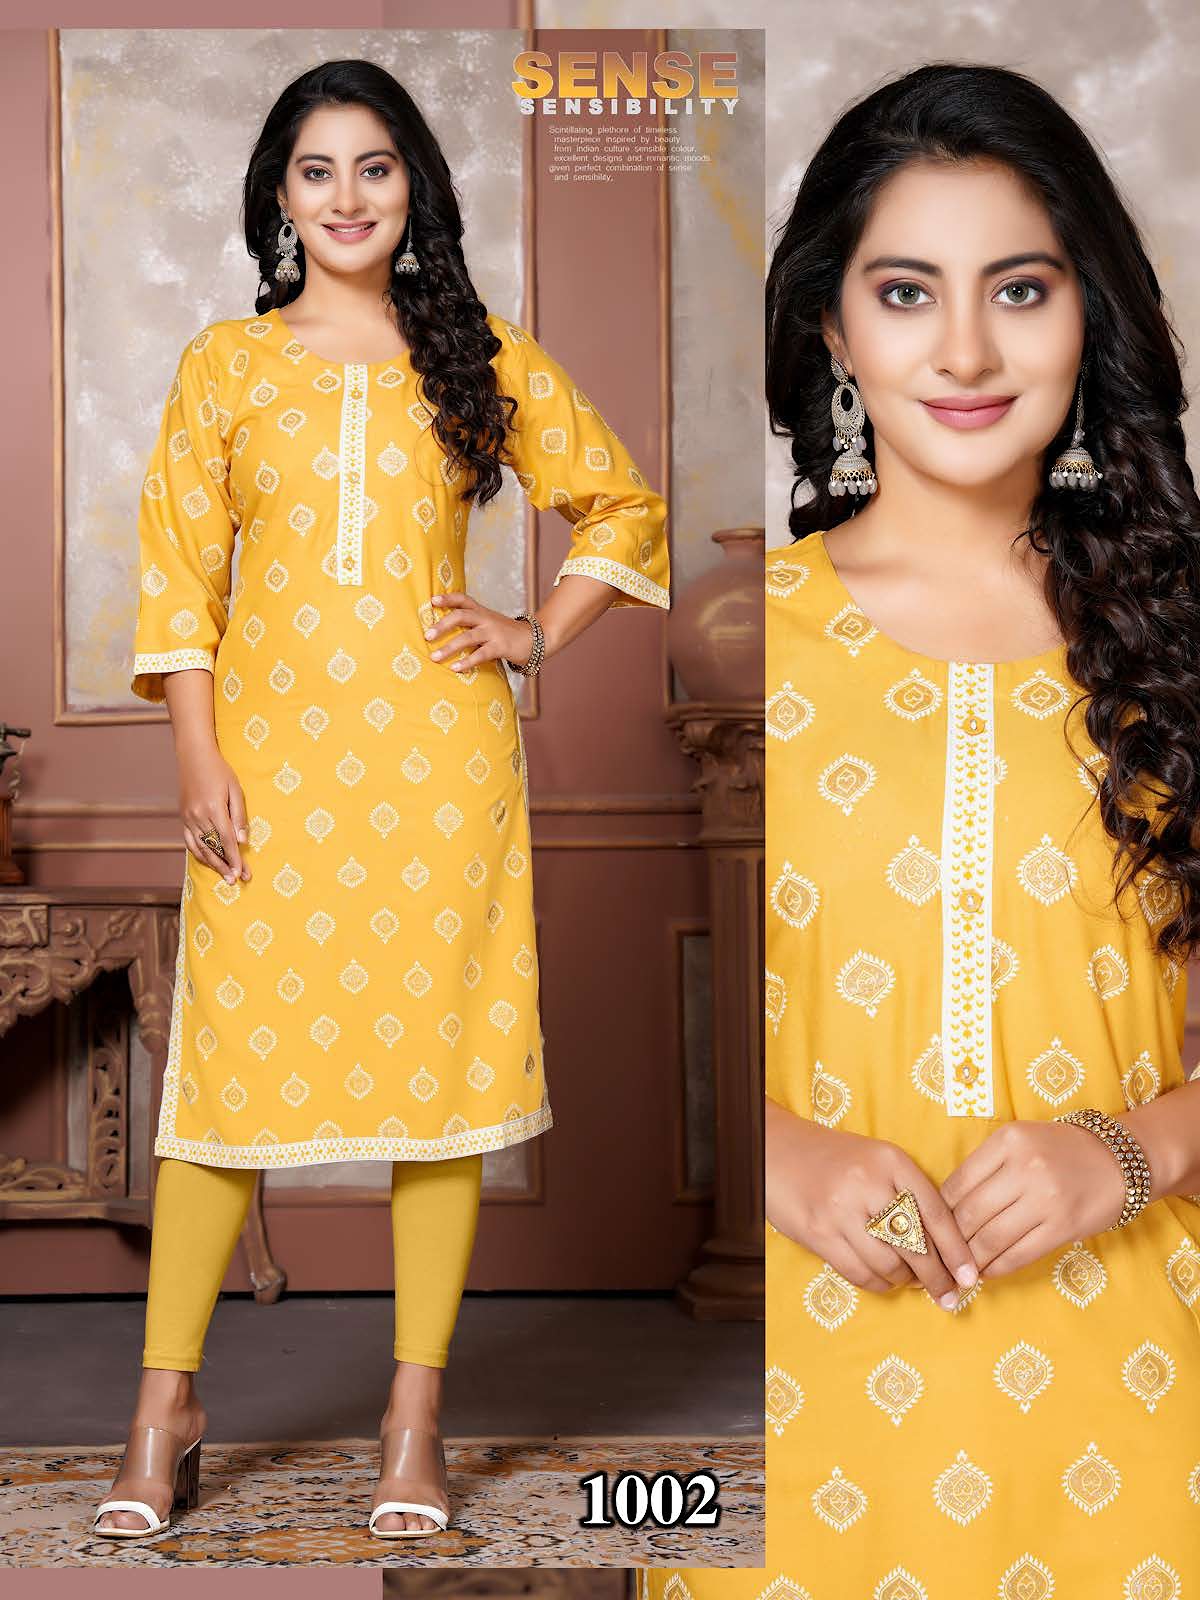 Lemon Yellow Floral Printed Cotton Suit Set With Gota Work On Neck and  Dupatta at Rs 1020.00 | Sanganer | Jaipur| ID: 2852073381730